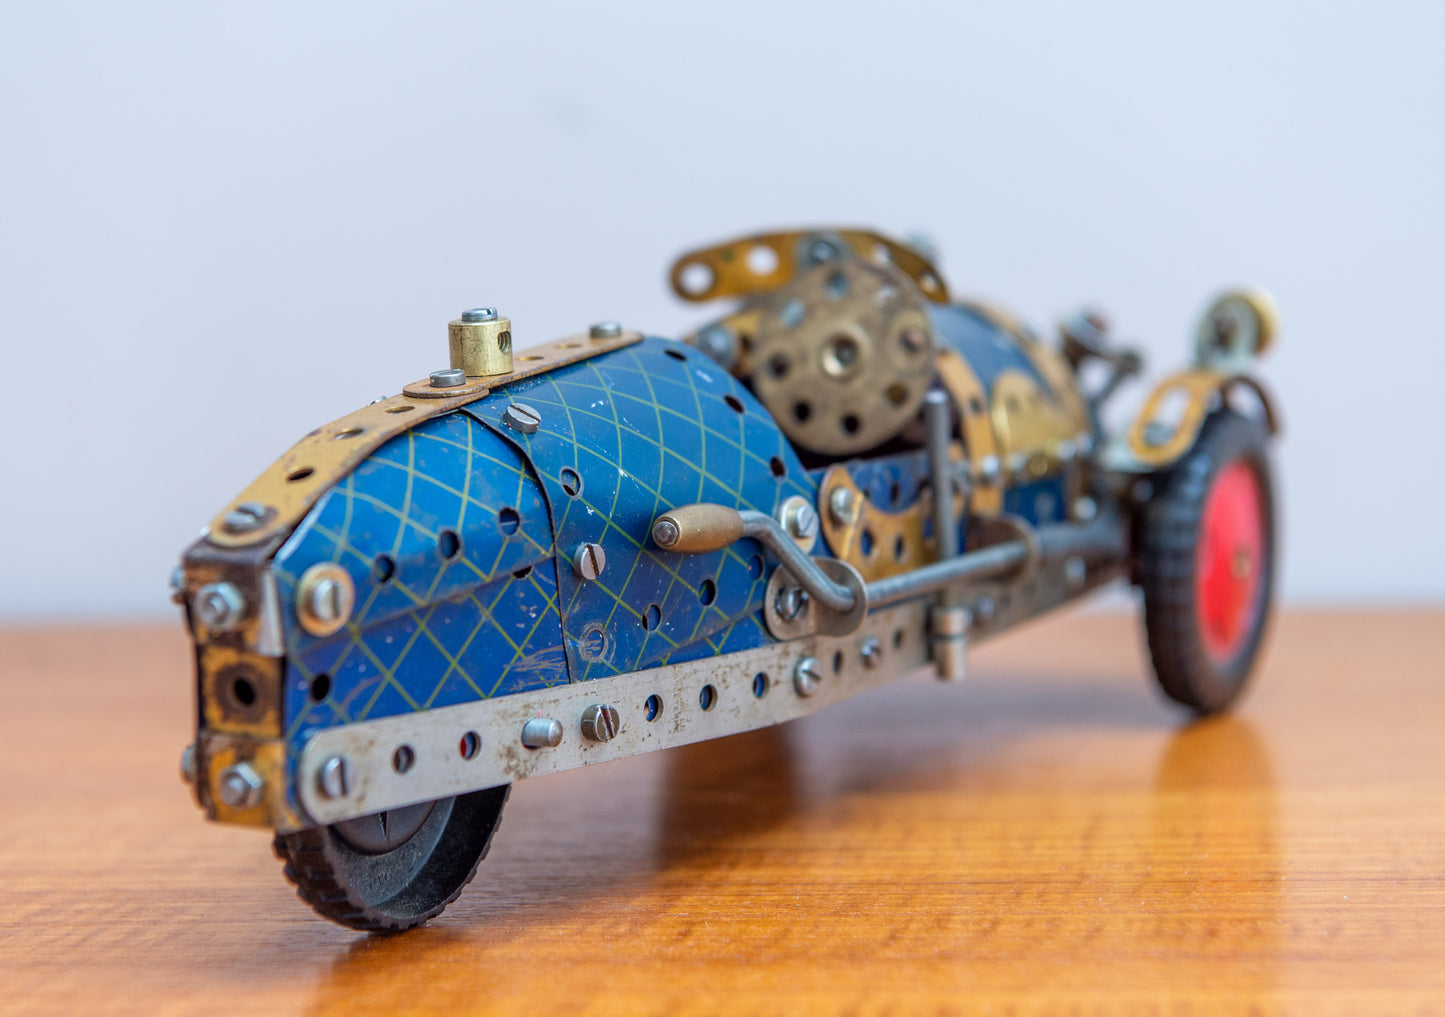 A Fine Scratch Built Meccano 3 Wheel Racing Car In Red Blue And Gold. Made In England. Circa 1940